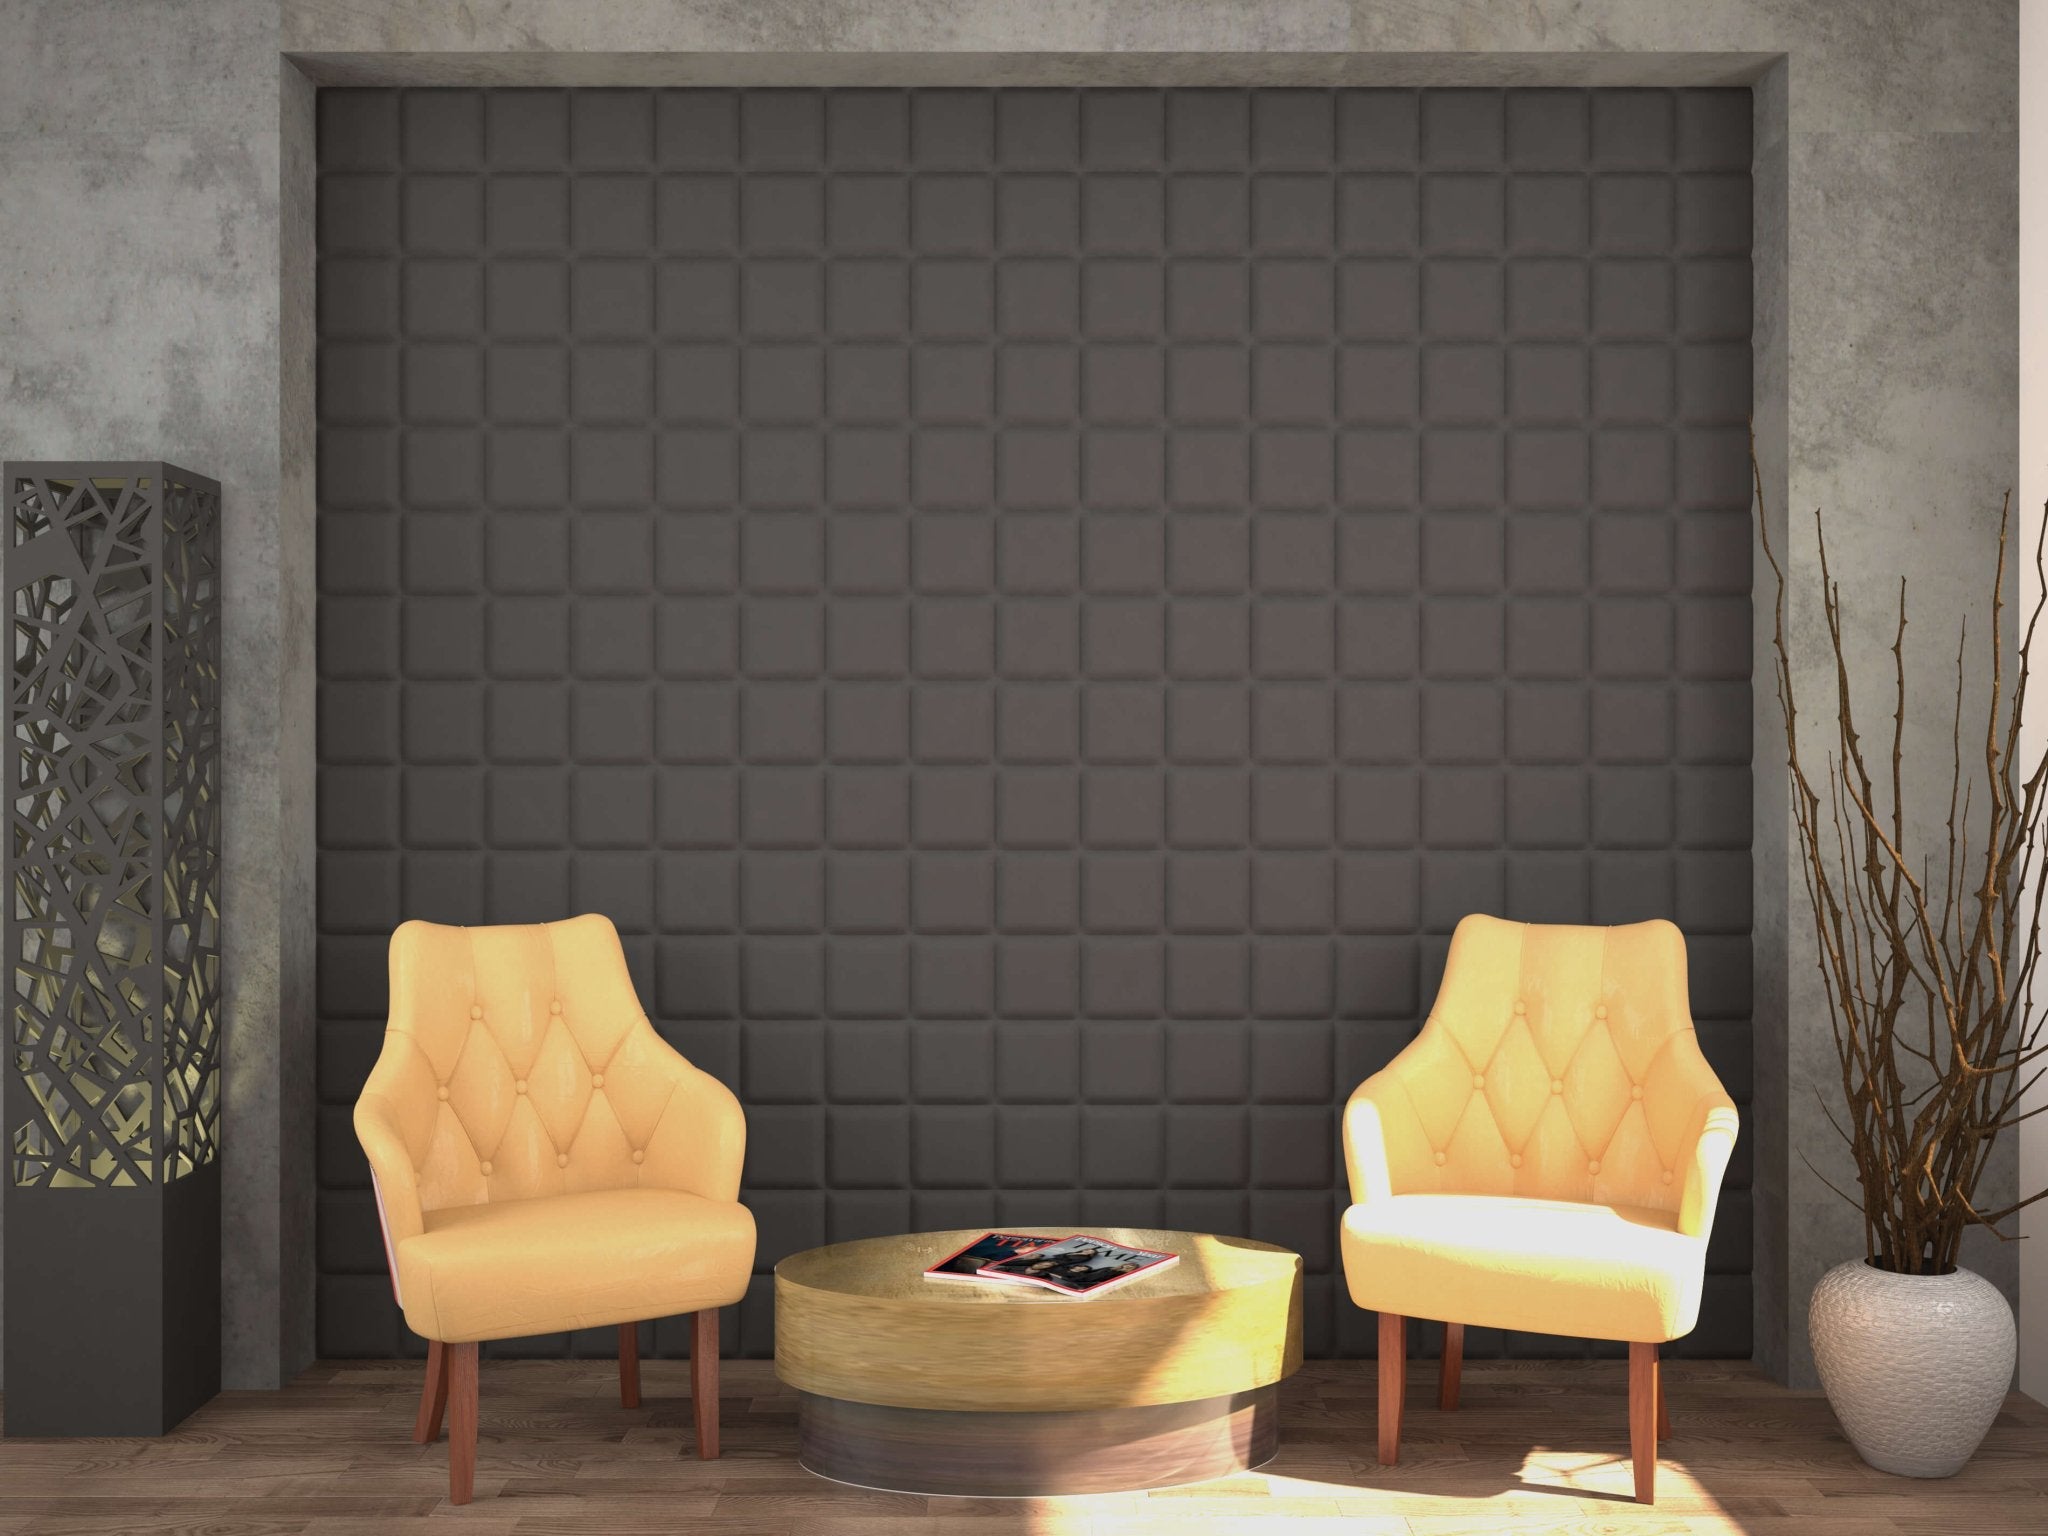 SQUARE 3D Wall Panel EPS - 3D Polystyrene Wall Panels | DecorMania